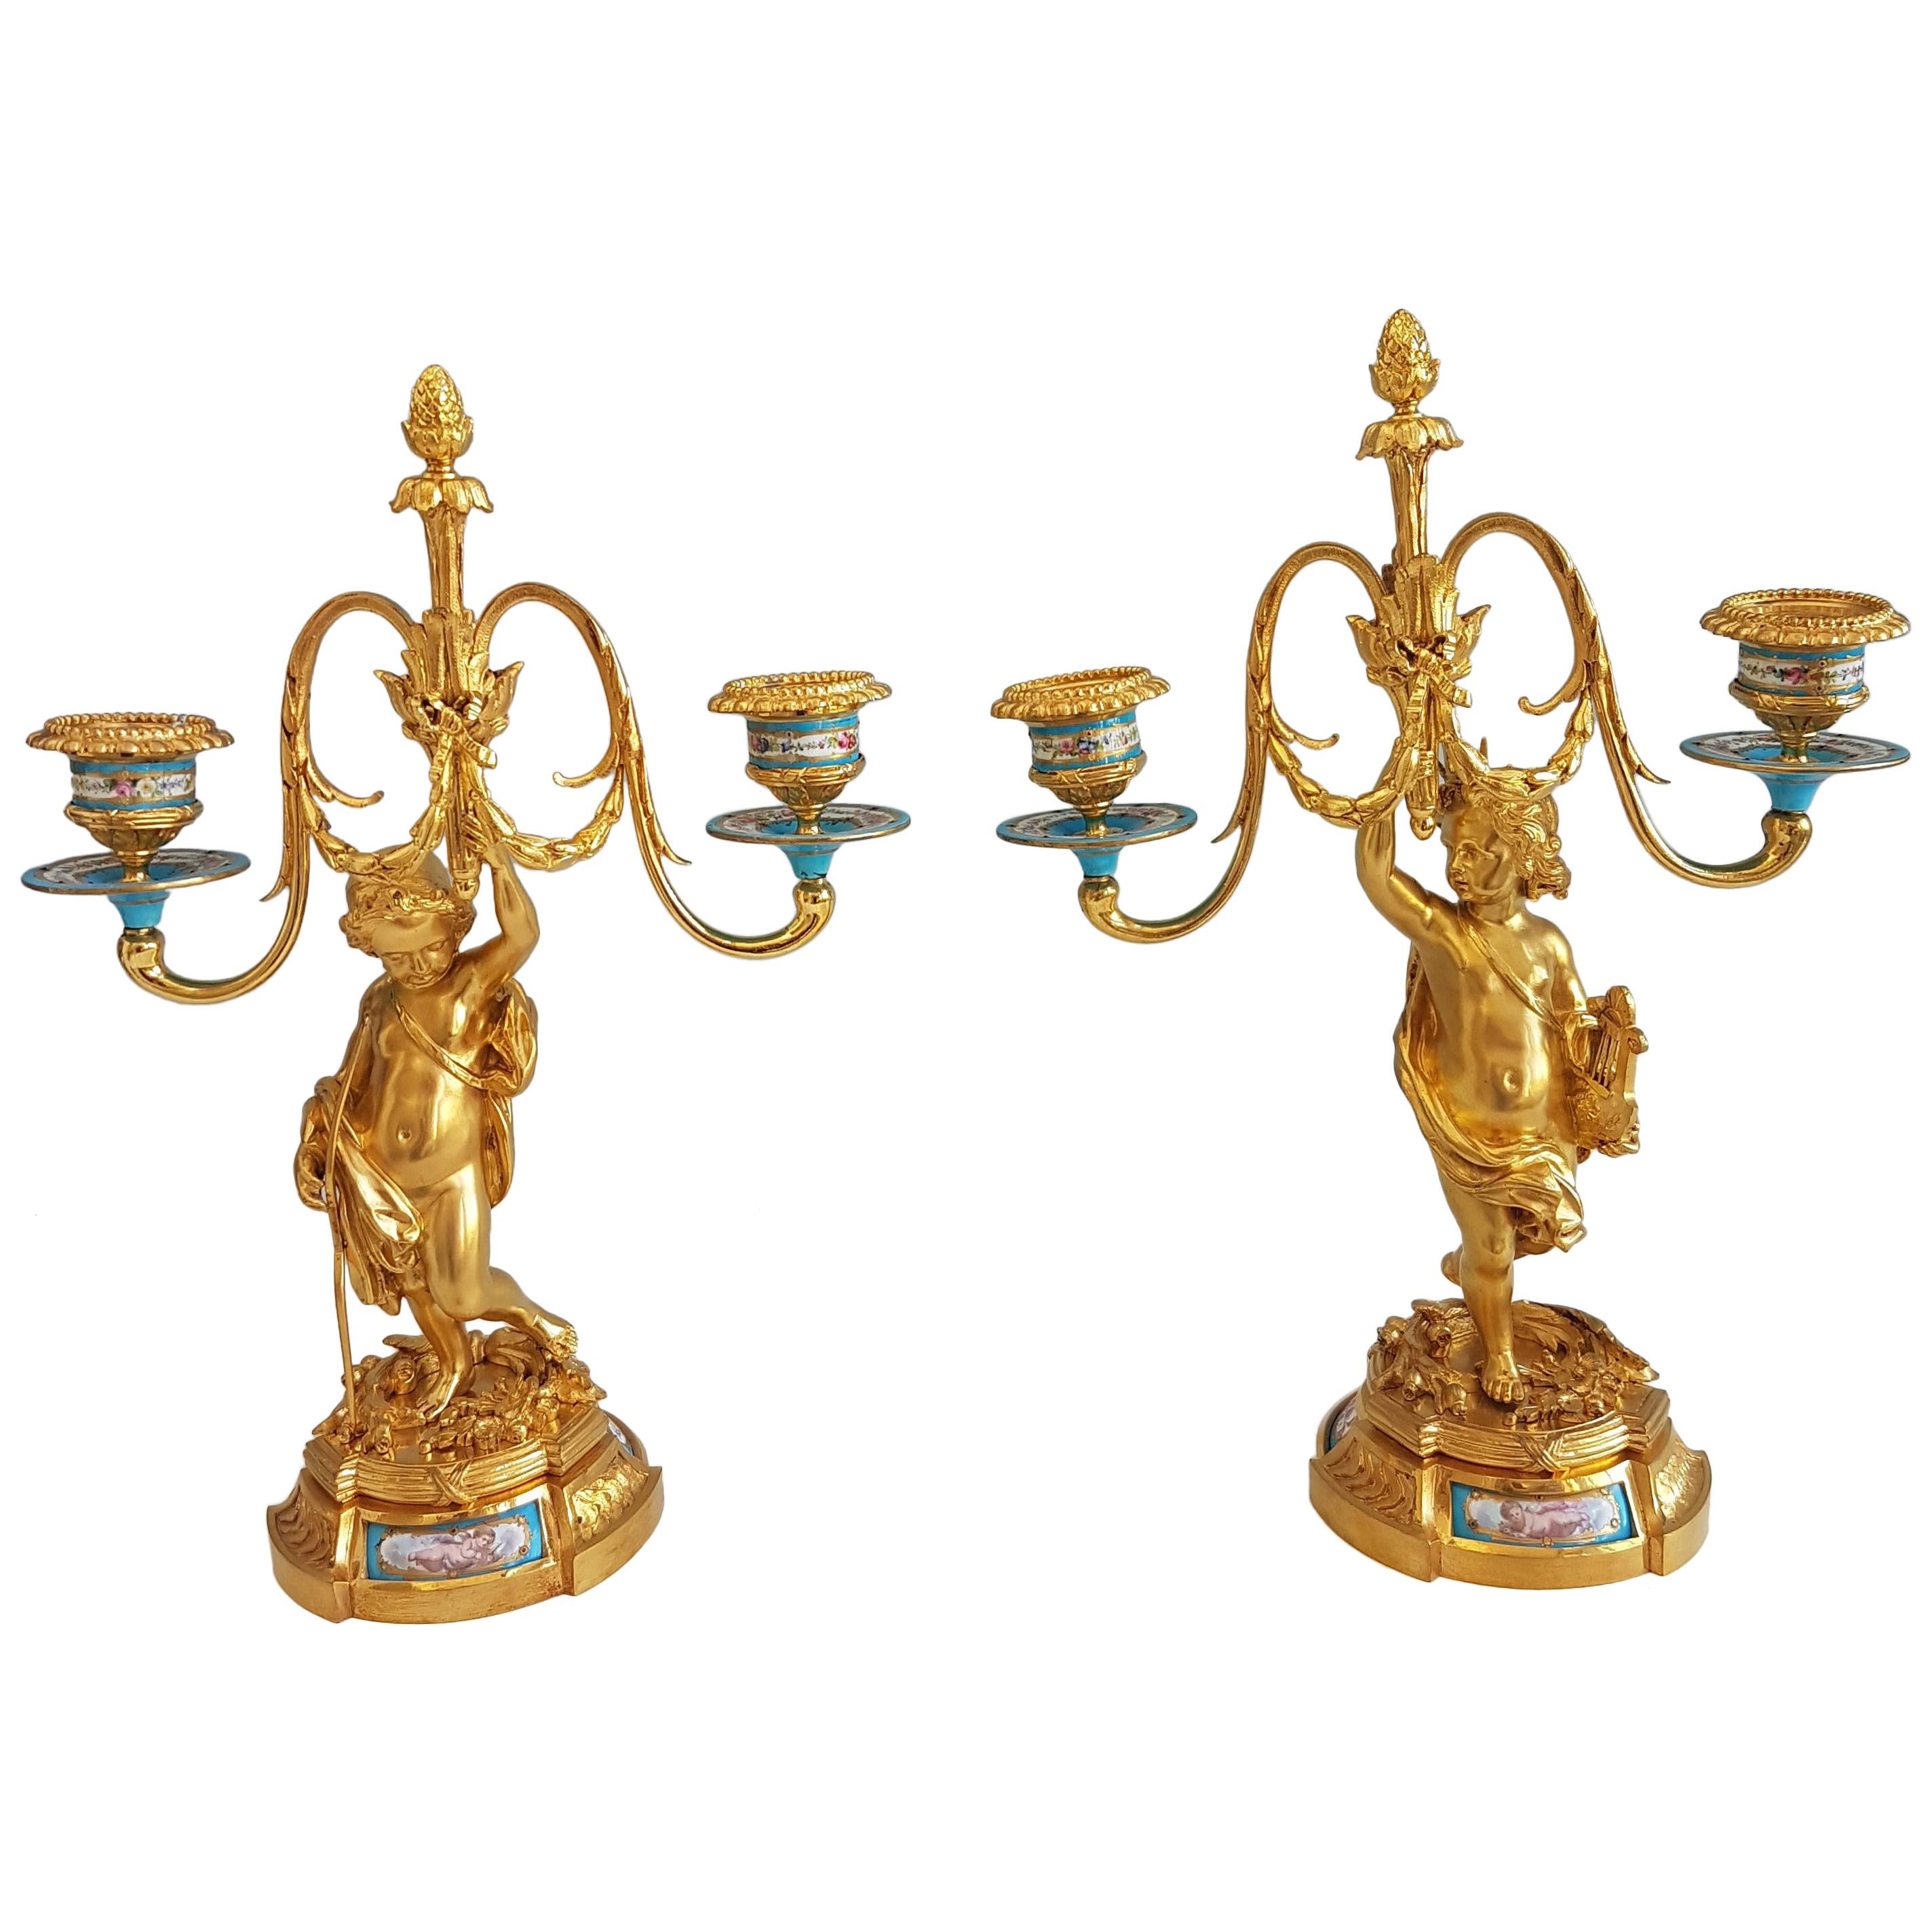 Pair of French Ormolu and Porcelain Candelabra For Sale